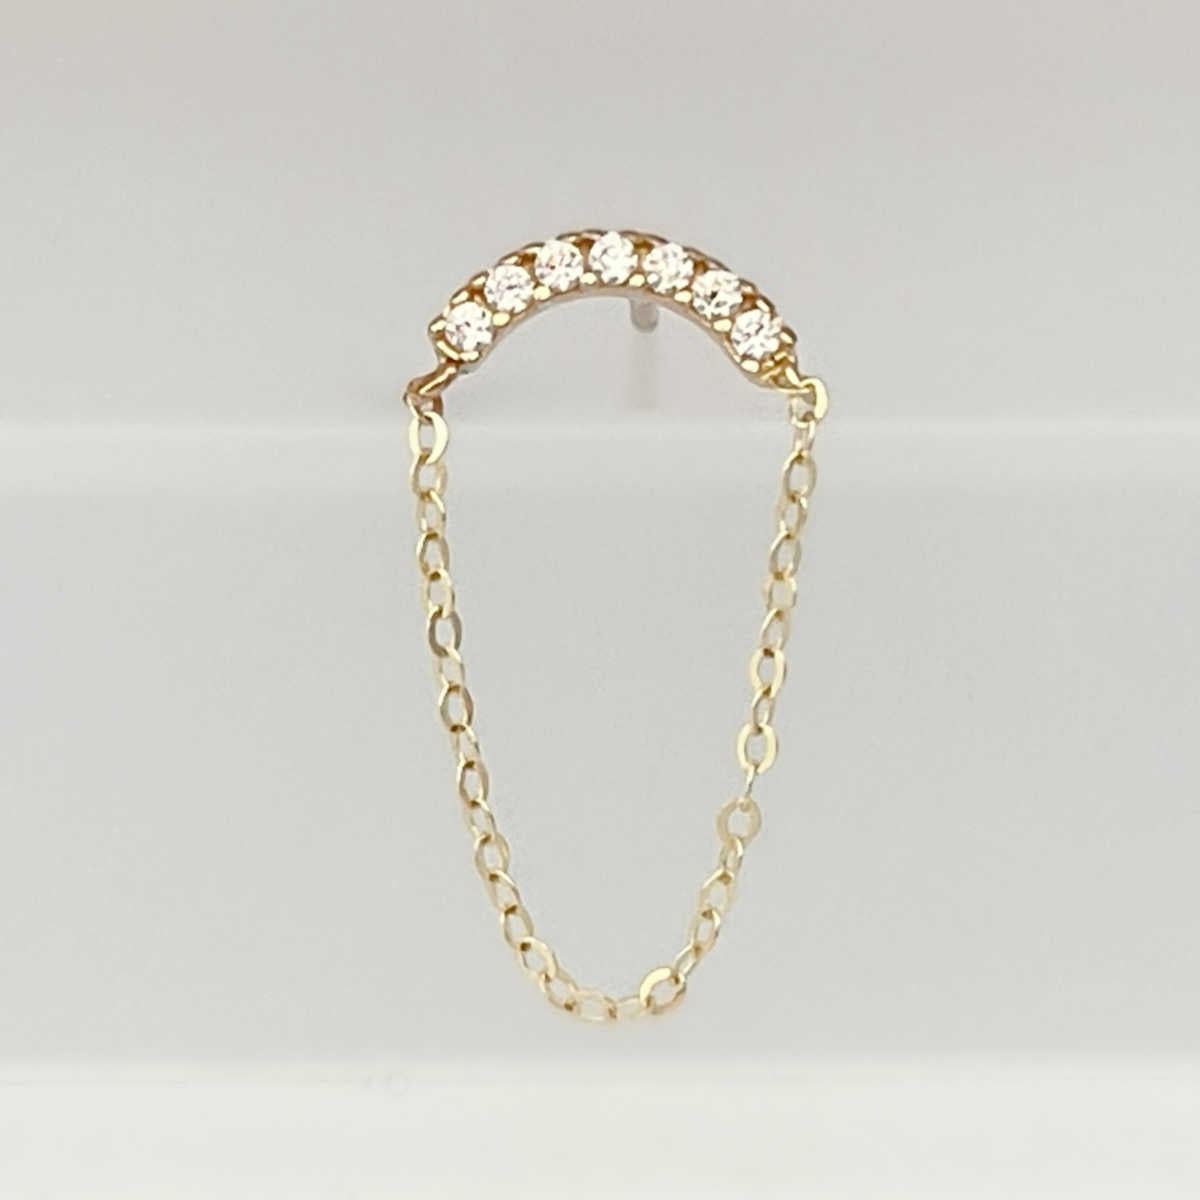 Curved Bar with Chain Gold Earring | 14K Studs from Two of Most